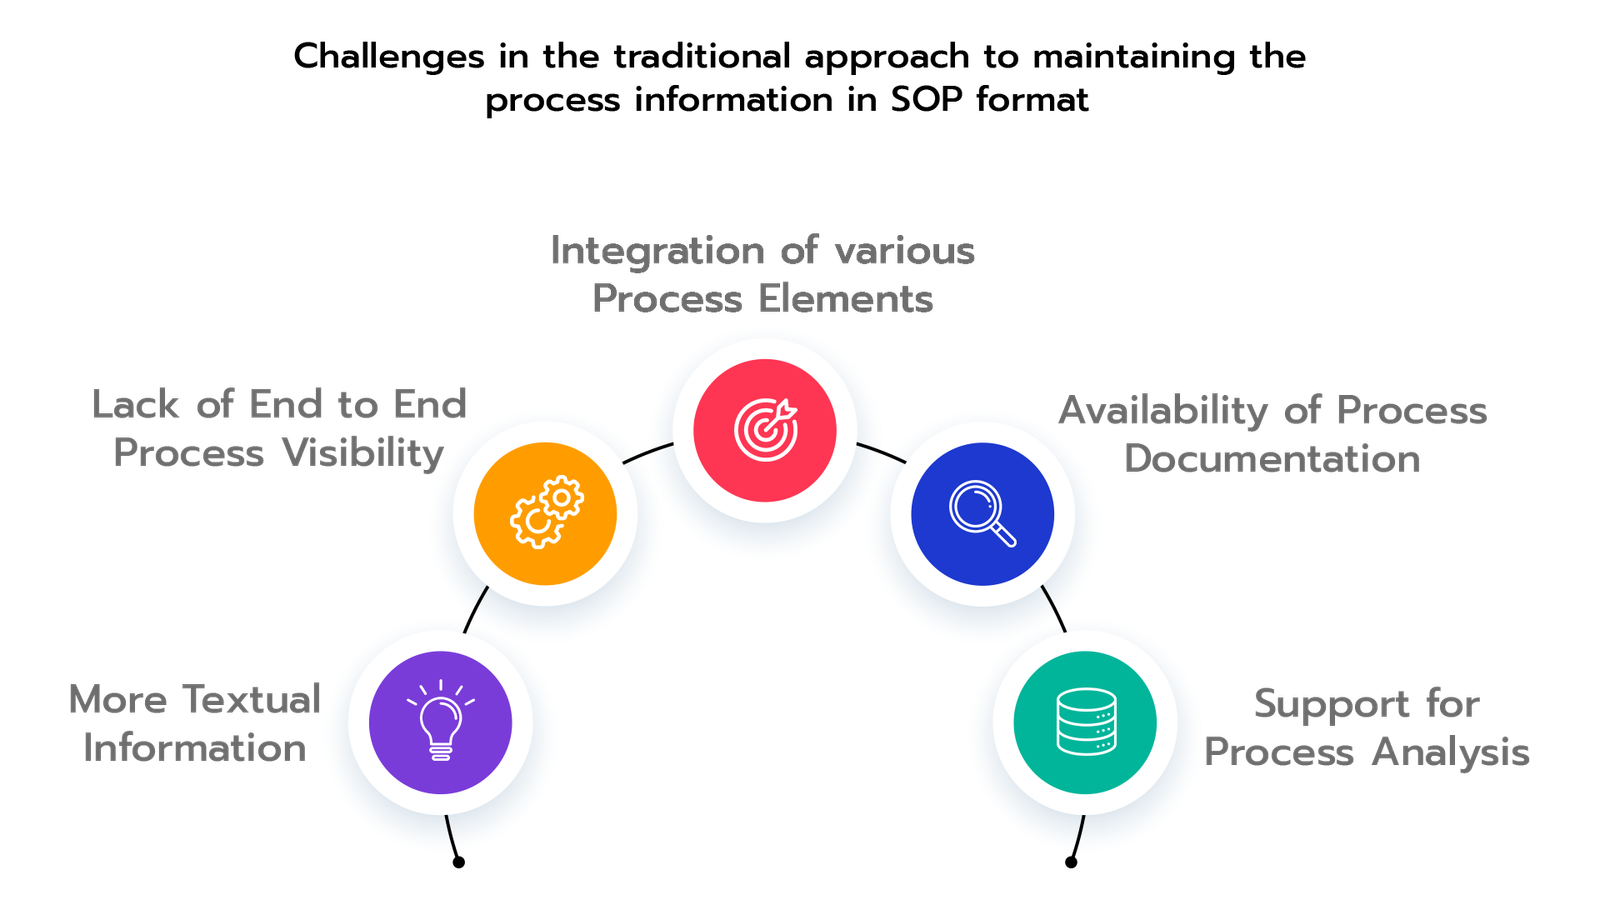 Business process mapping/modeling